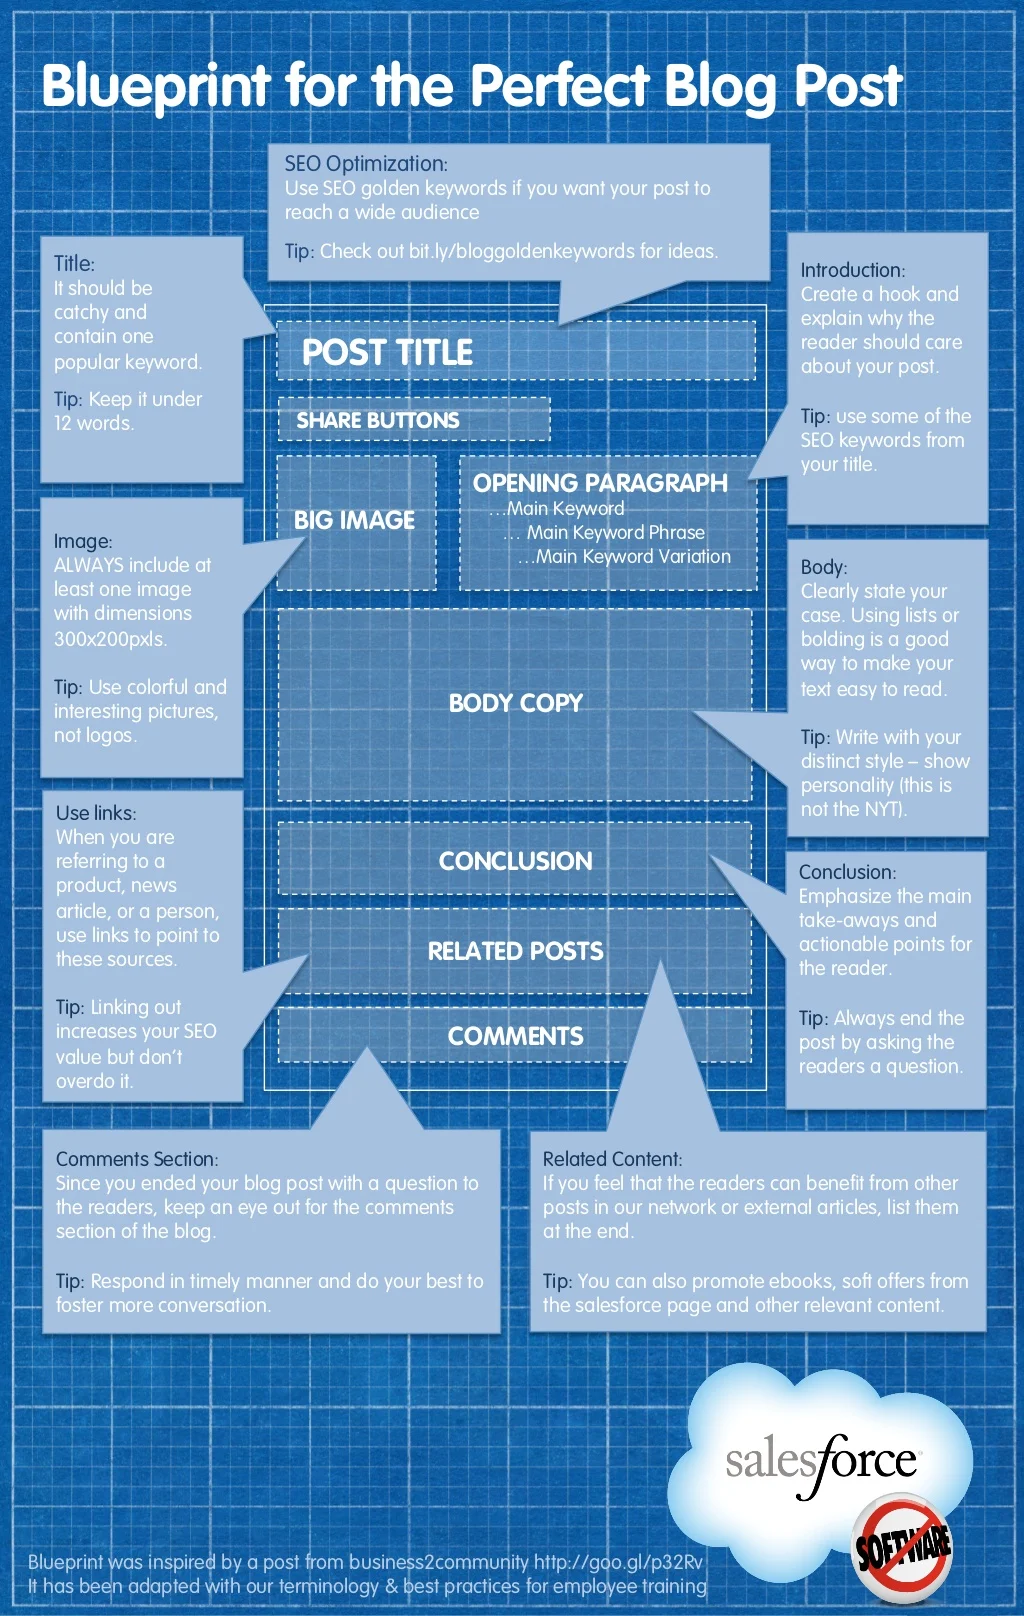 The Blueprint for the Perfect Blog Post (Infographic)